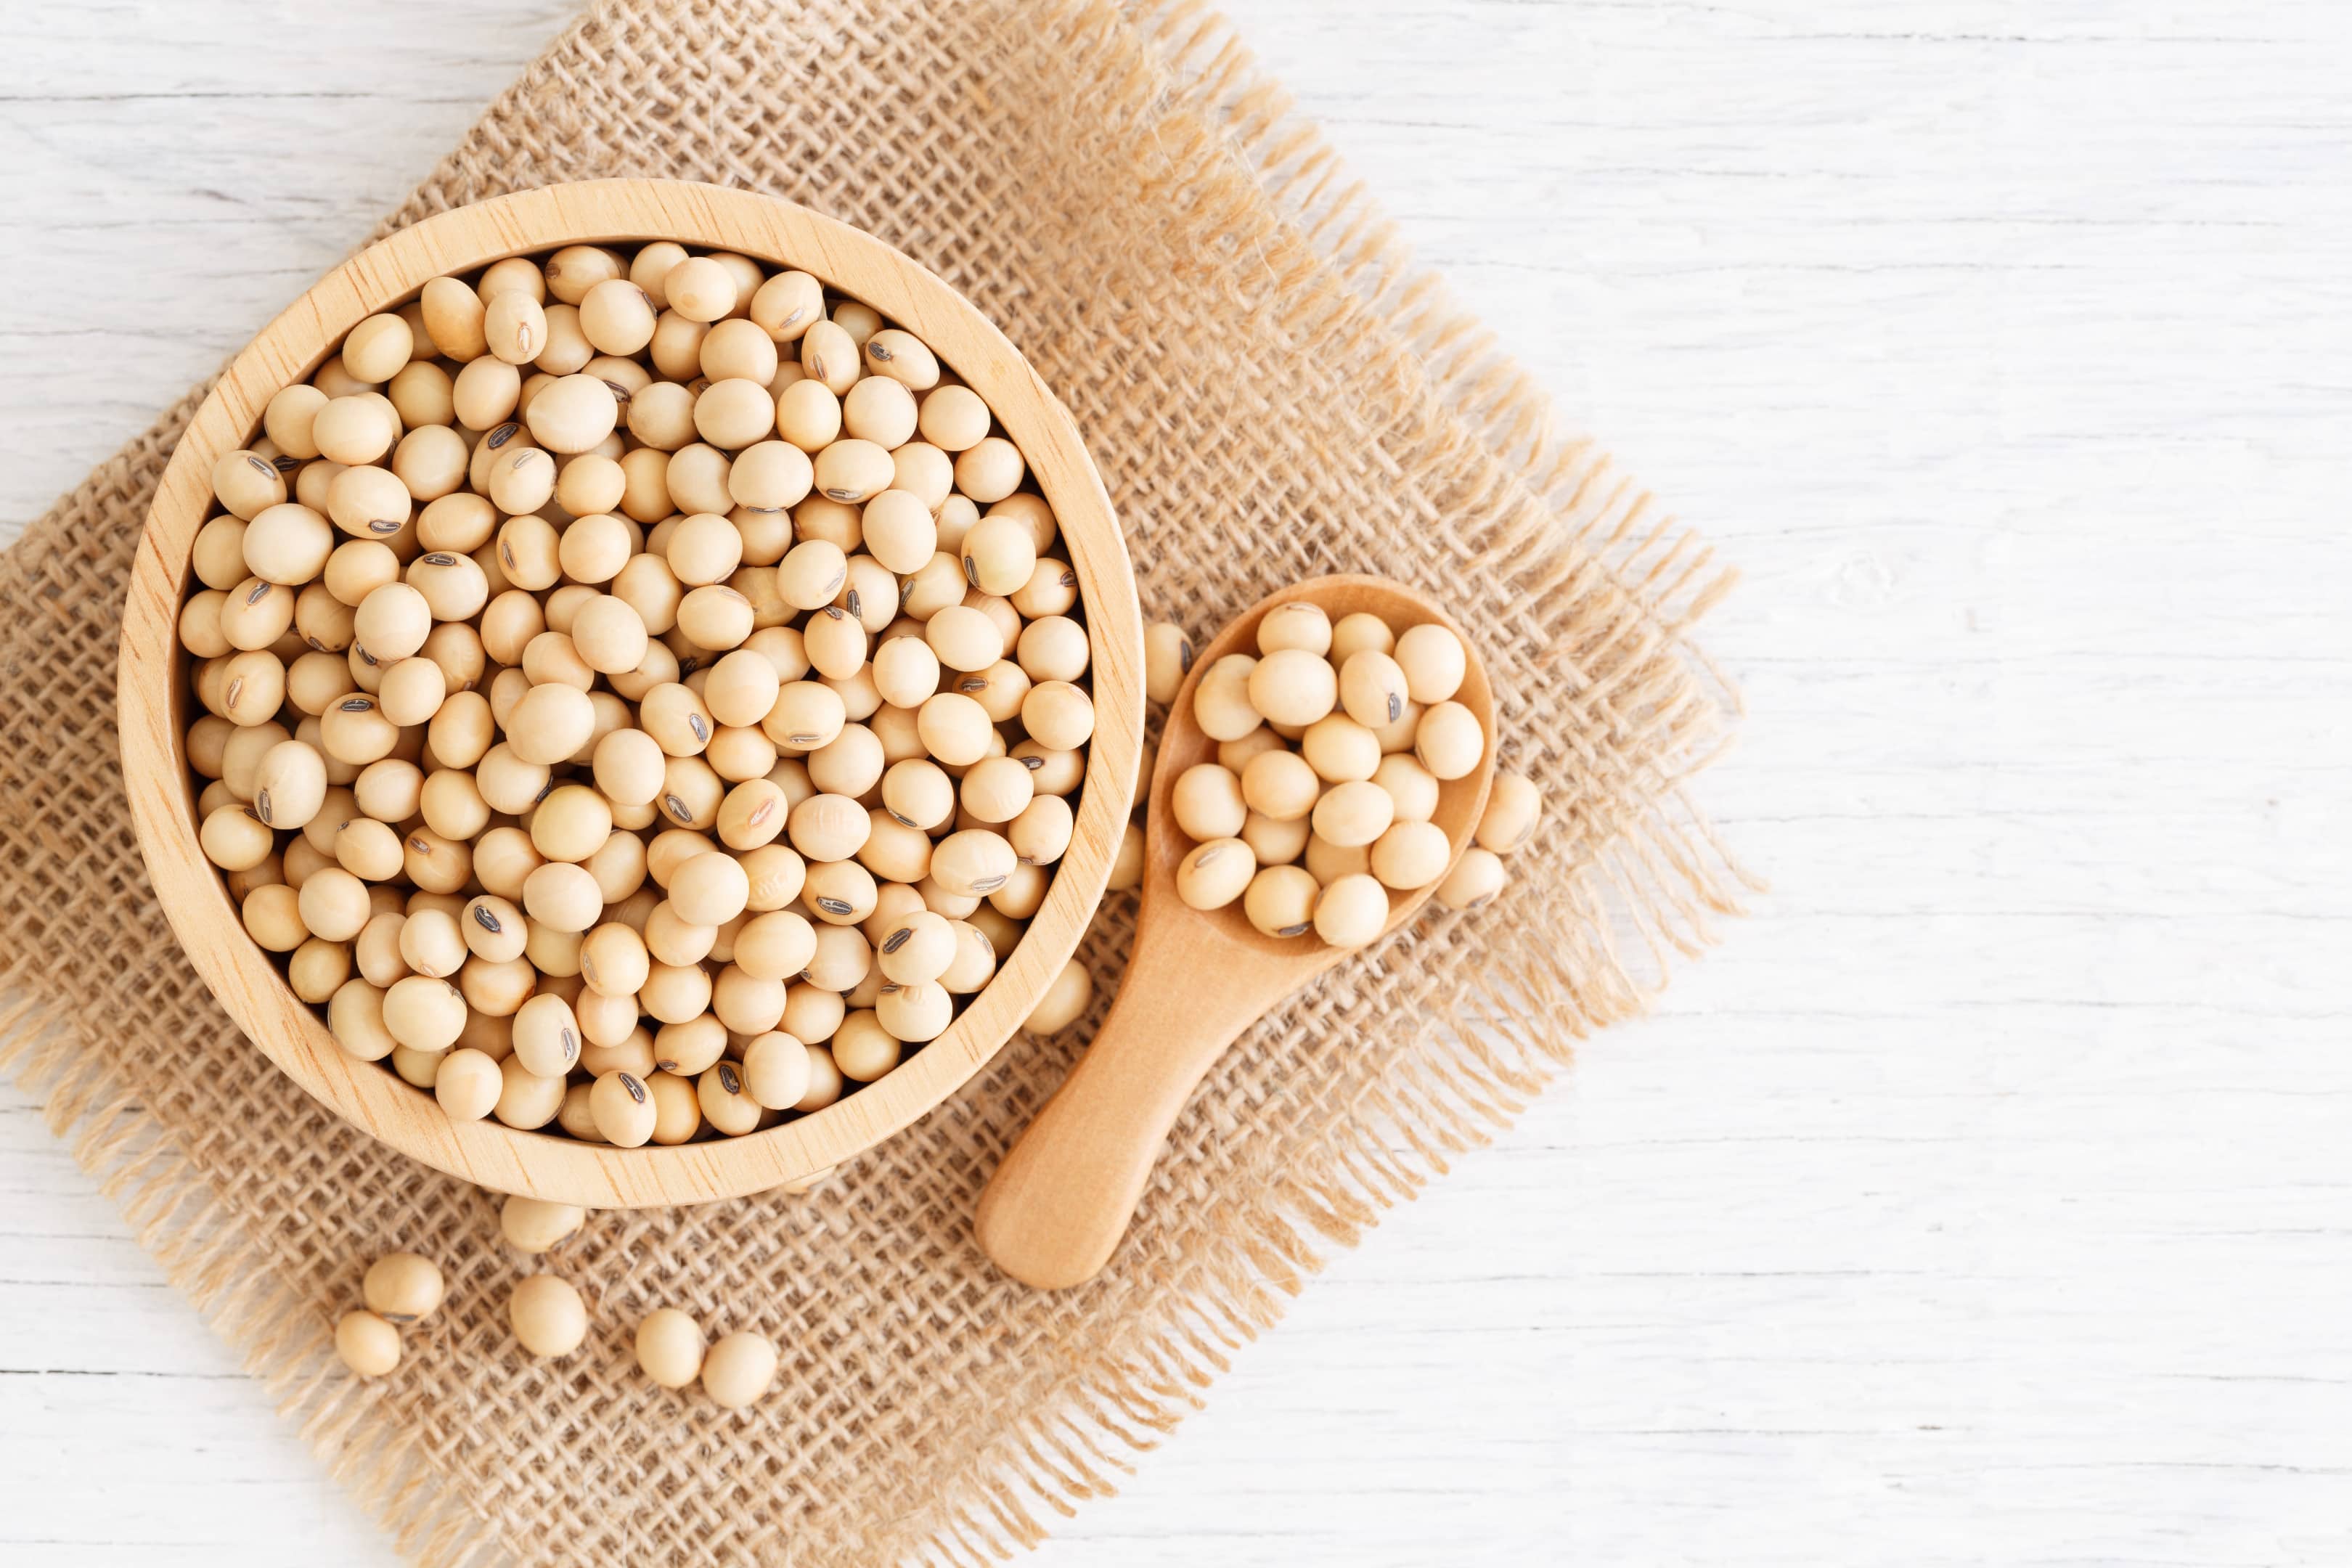 Soybeans in Wooden Bowl With Wooden Spoon on White Table